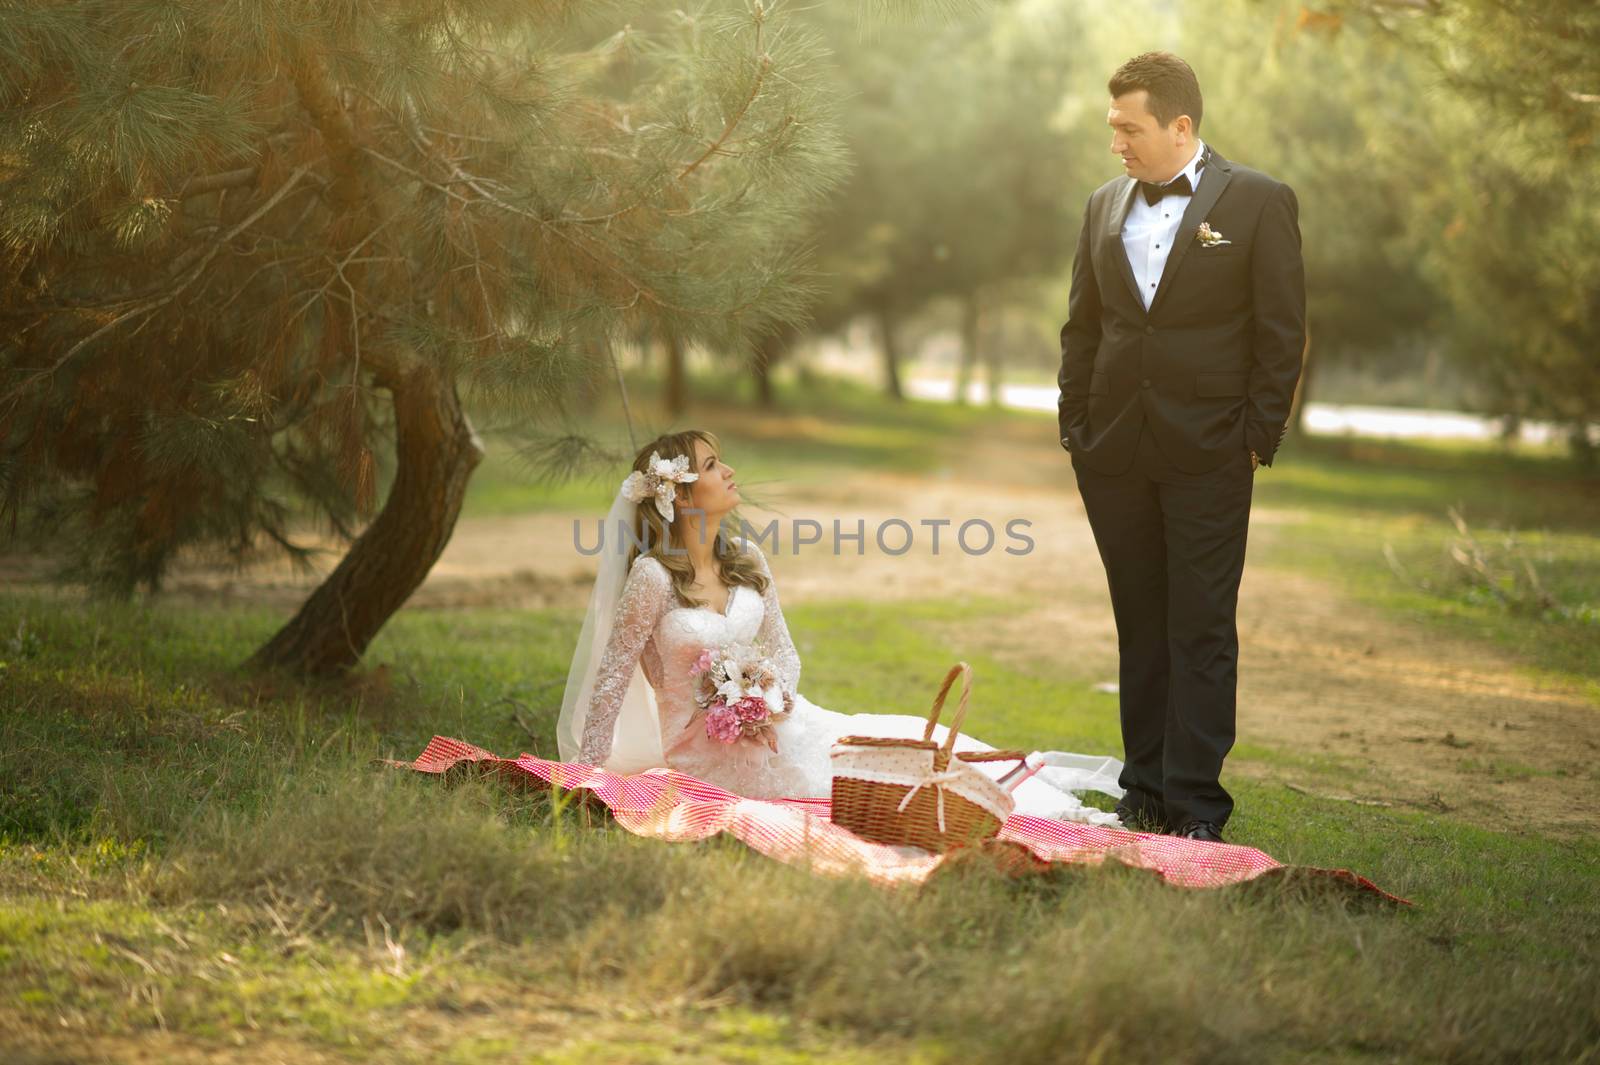 Young bride and groom in wedding dress and suit getting married